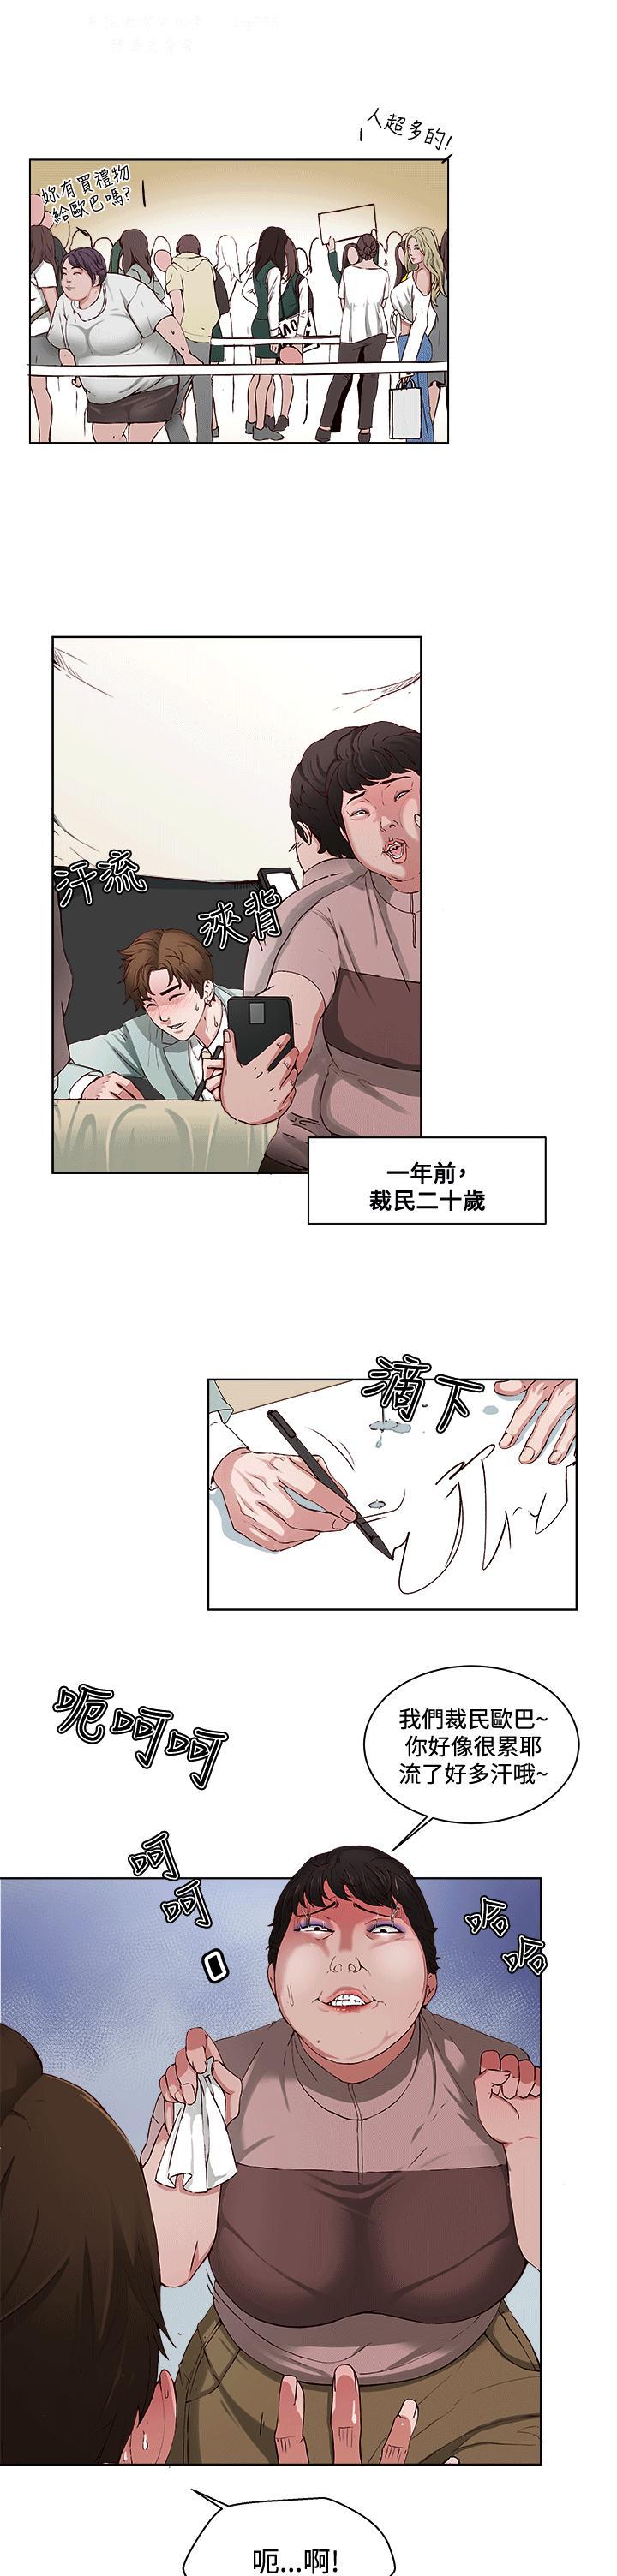 Blowjob 私生，爱到疯狂 完结 Picked Up - Page 13